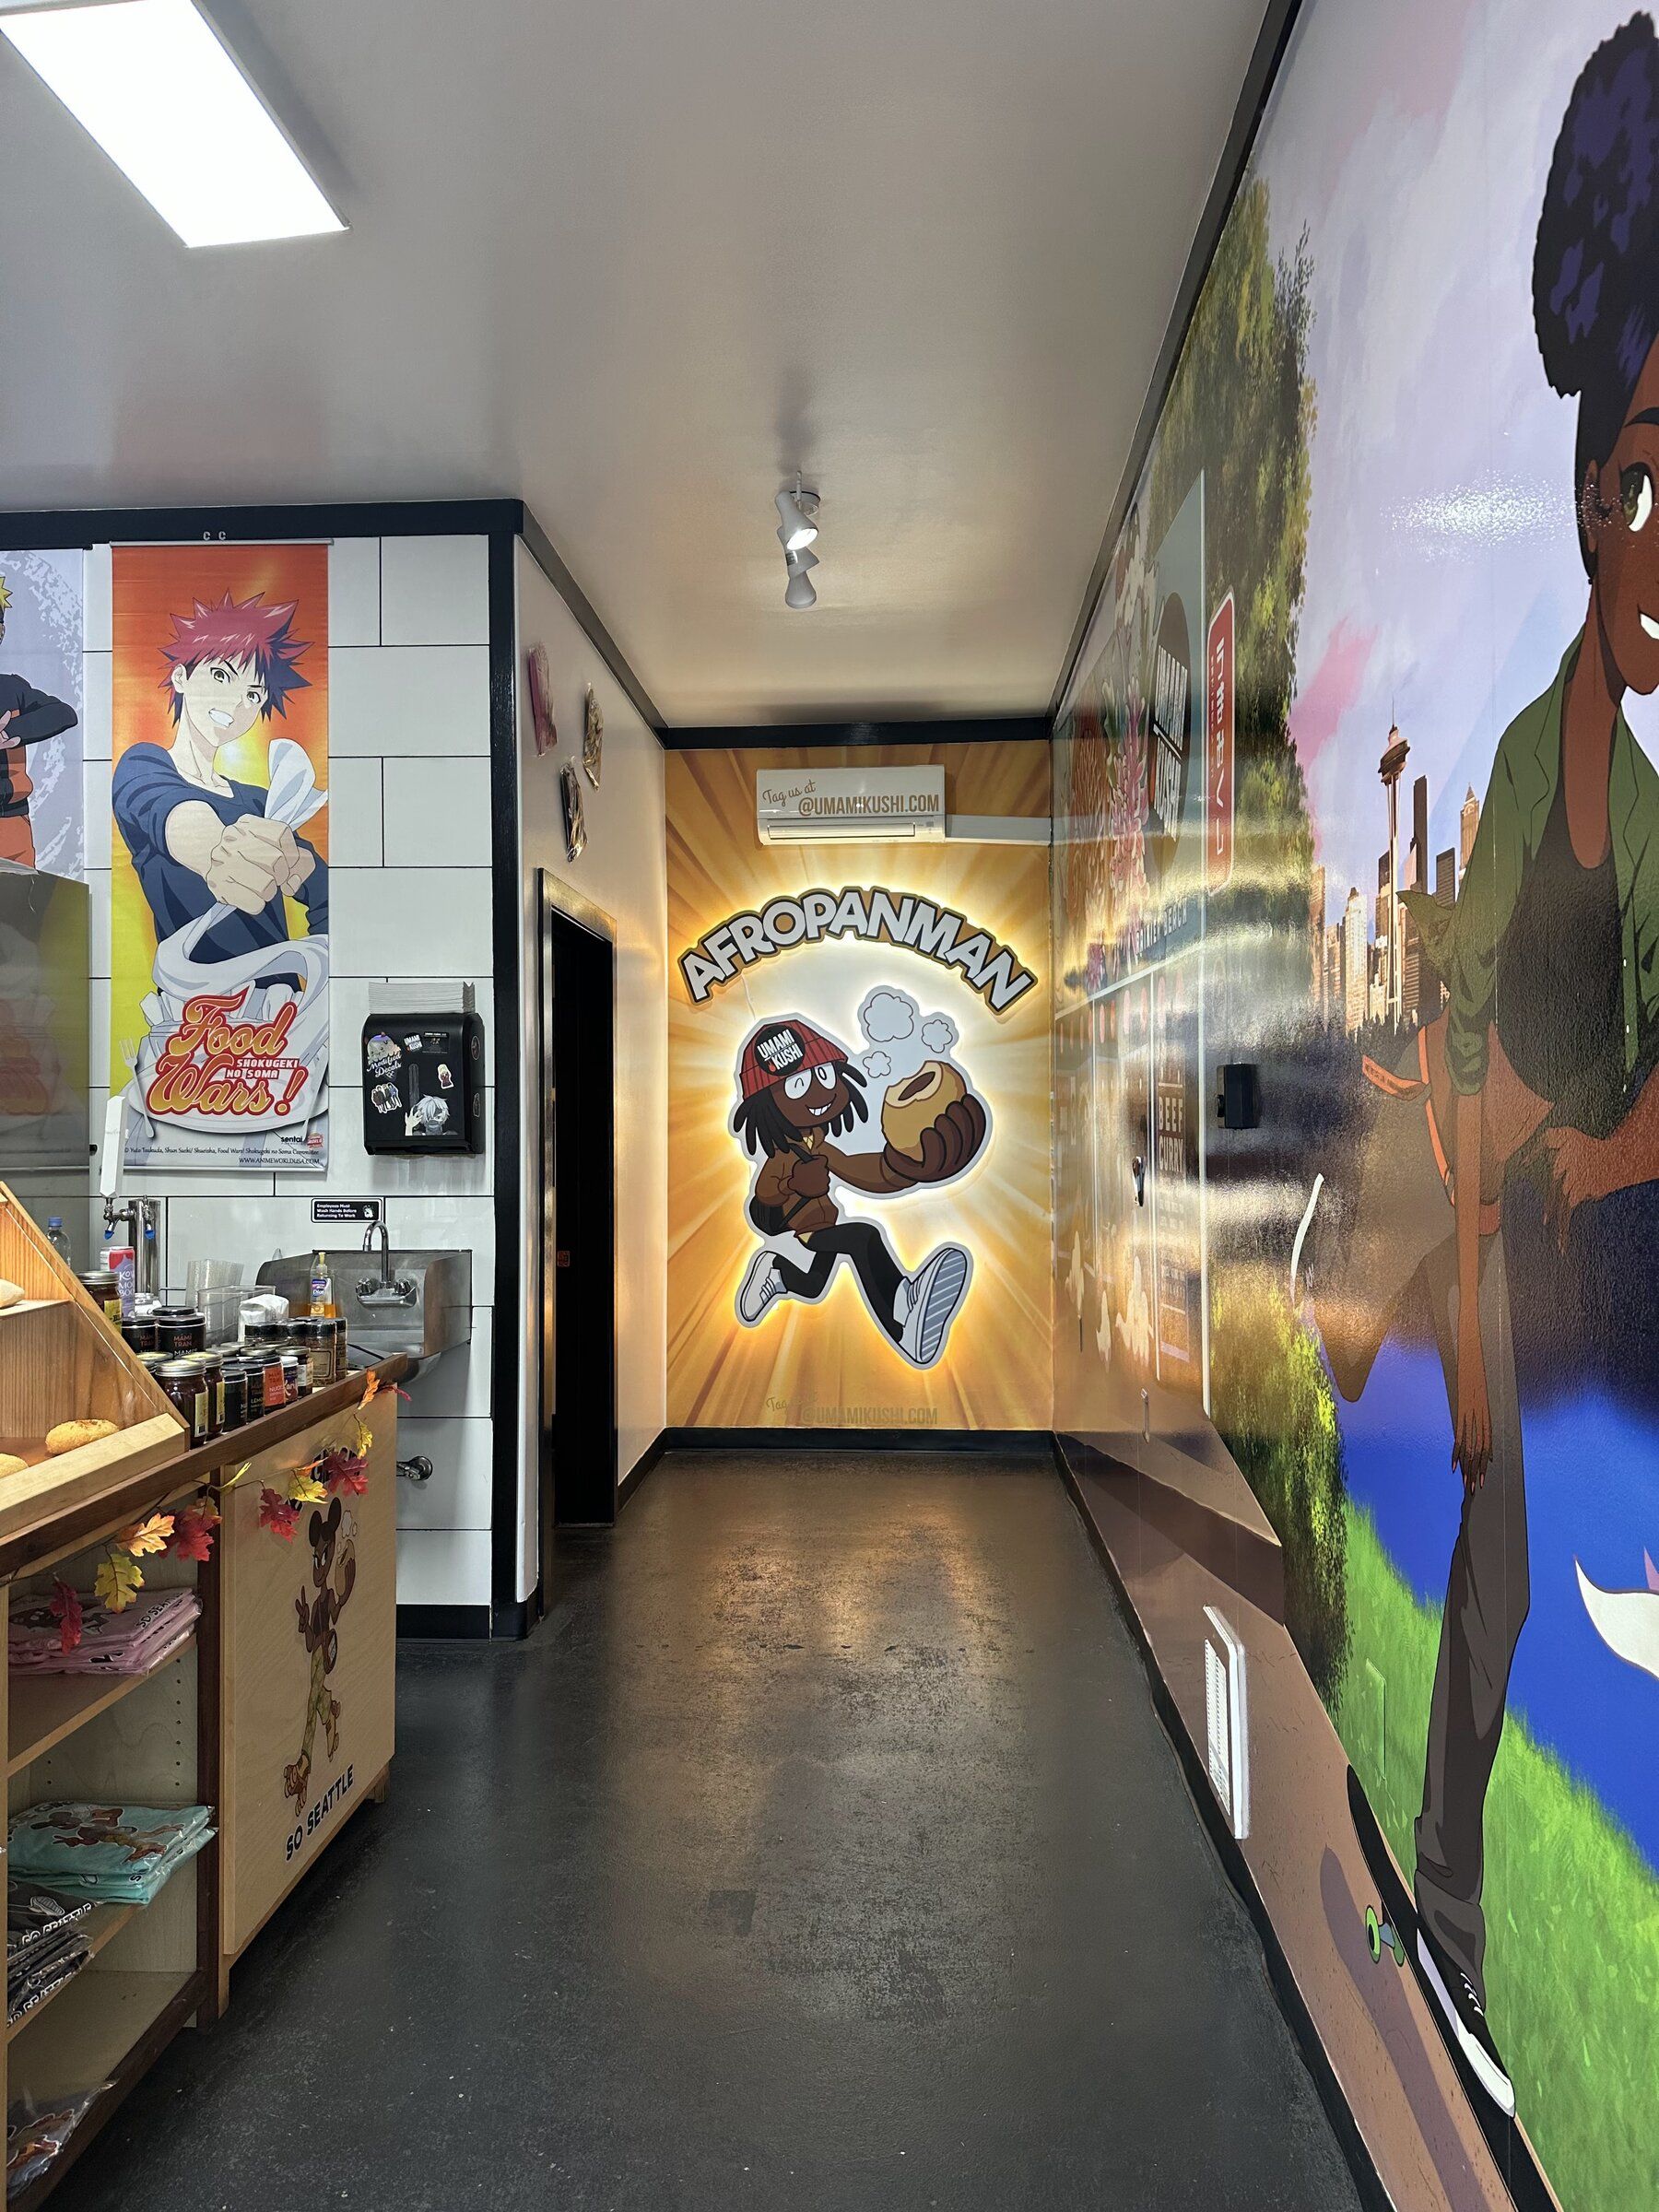 You'll Fall In Love With This Anime Themed Tea Room in Arkansas